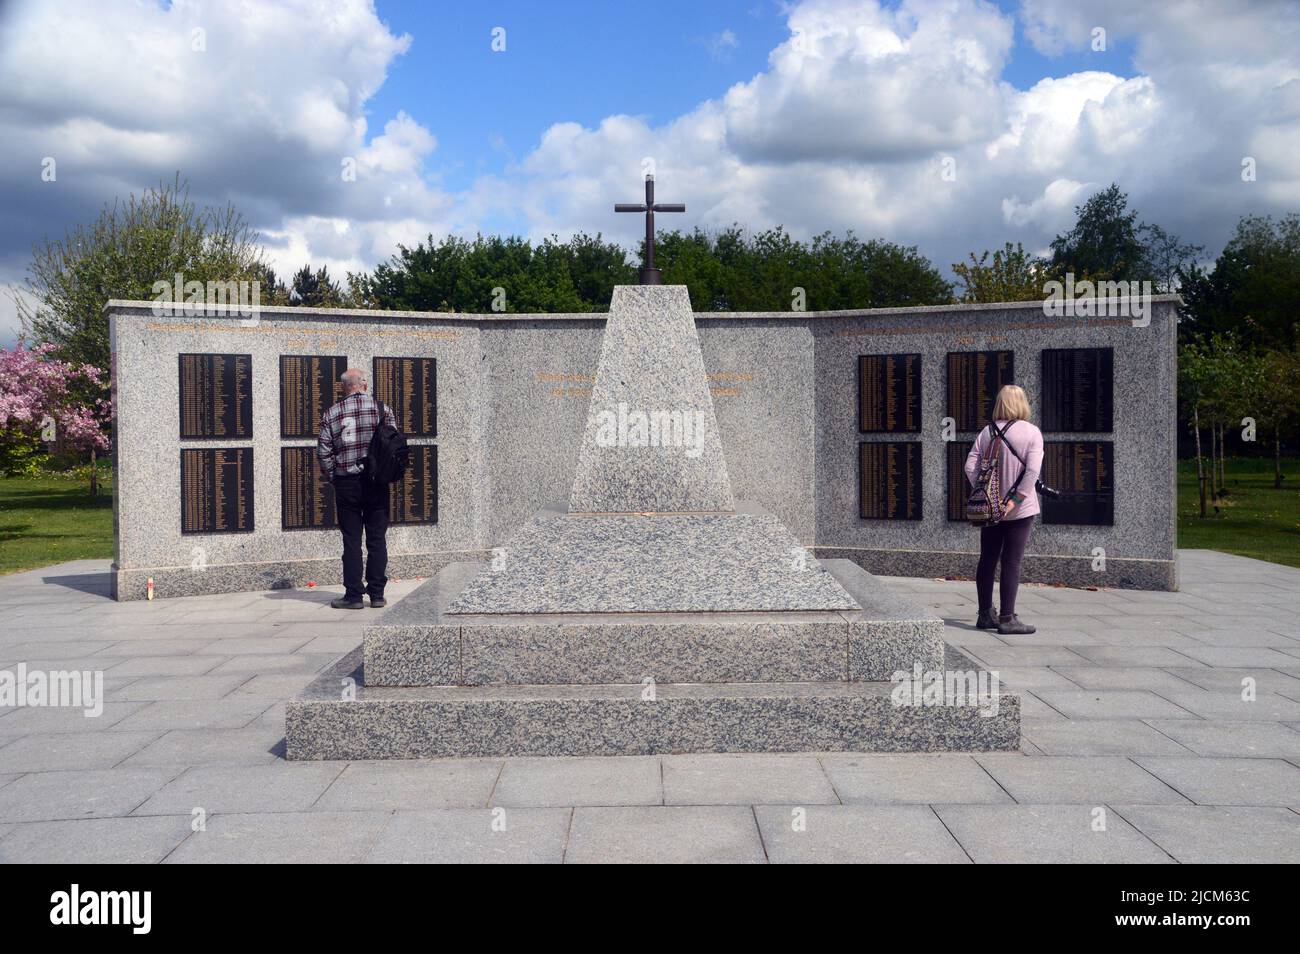 Two People at the Granite Replica of Camp Bastion Memorial Wall in Afghanistan at the National Memorial Arboretum, Staffordshire, England, UK. Stock Photo